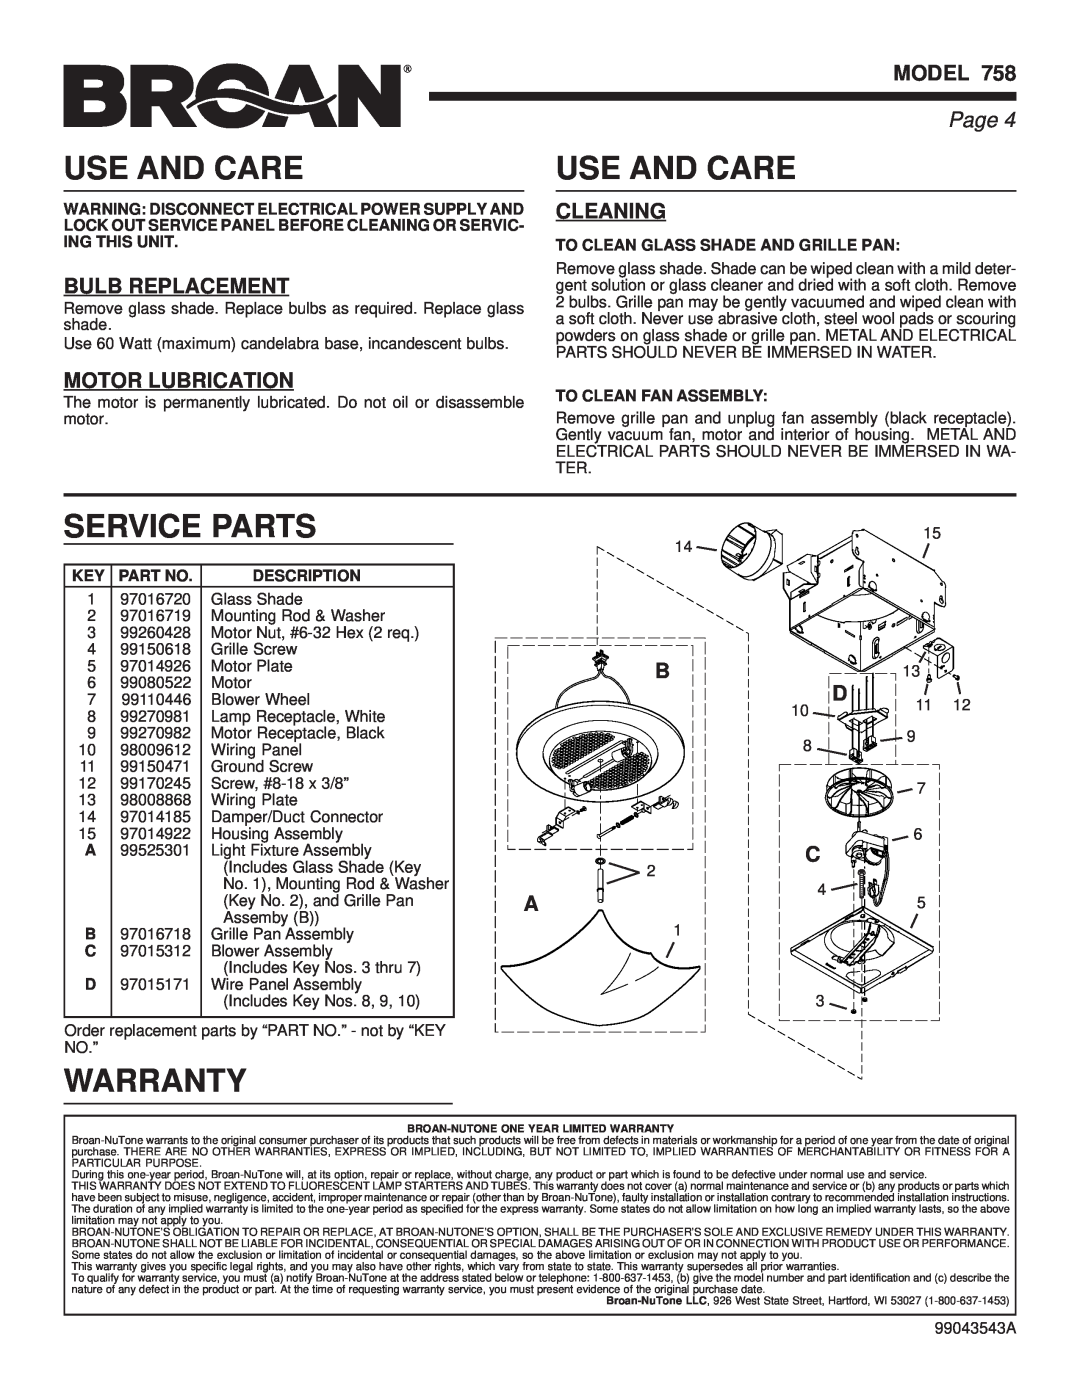 Broan 758 manual Use And Care, Service Parts, Warranty, Bulb Replacement, Cleaning, Motor Lubrication, Model, Page 